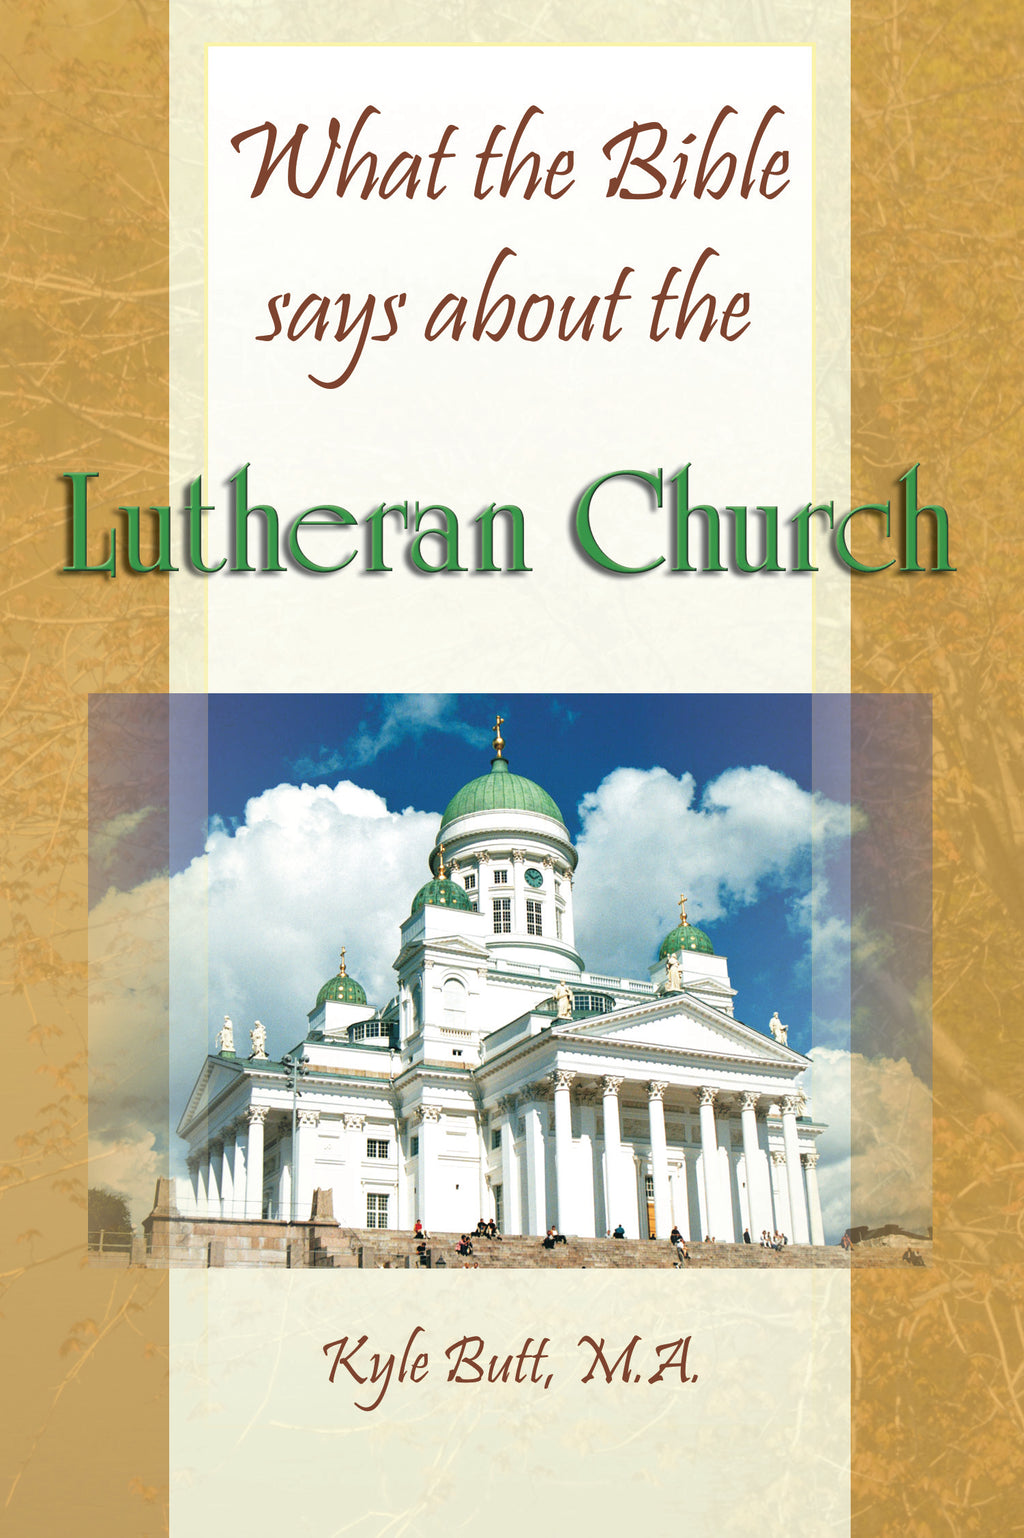 What the Bible says about the Lutheran Church